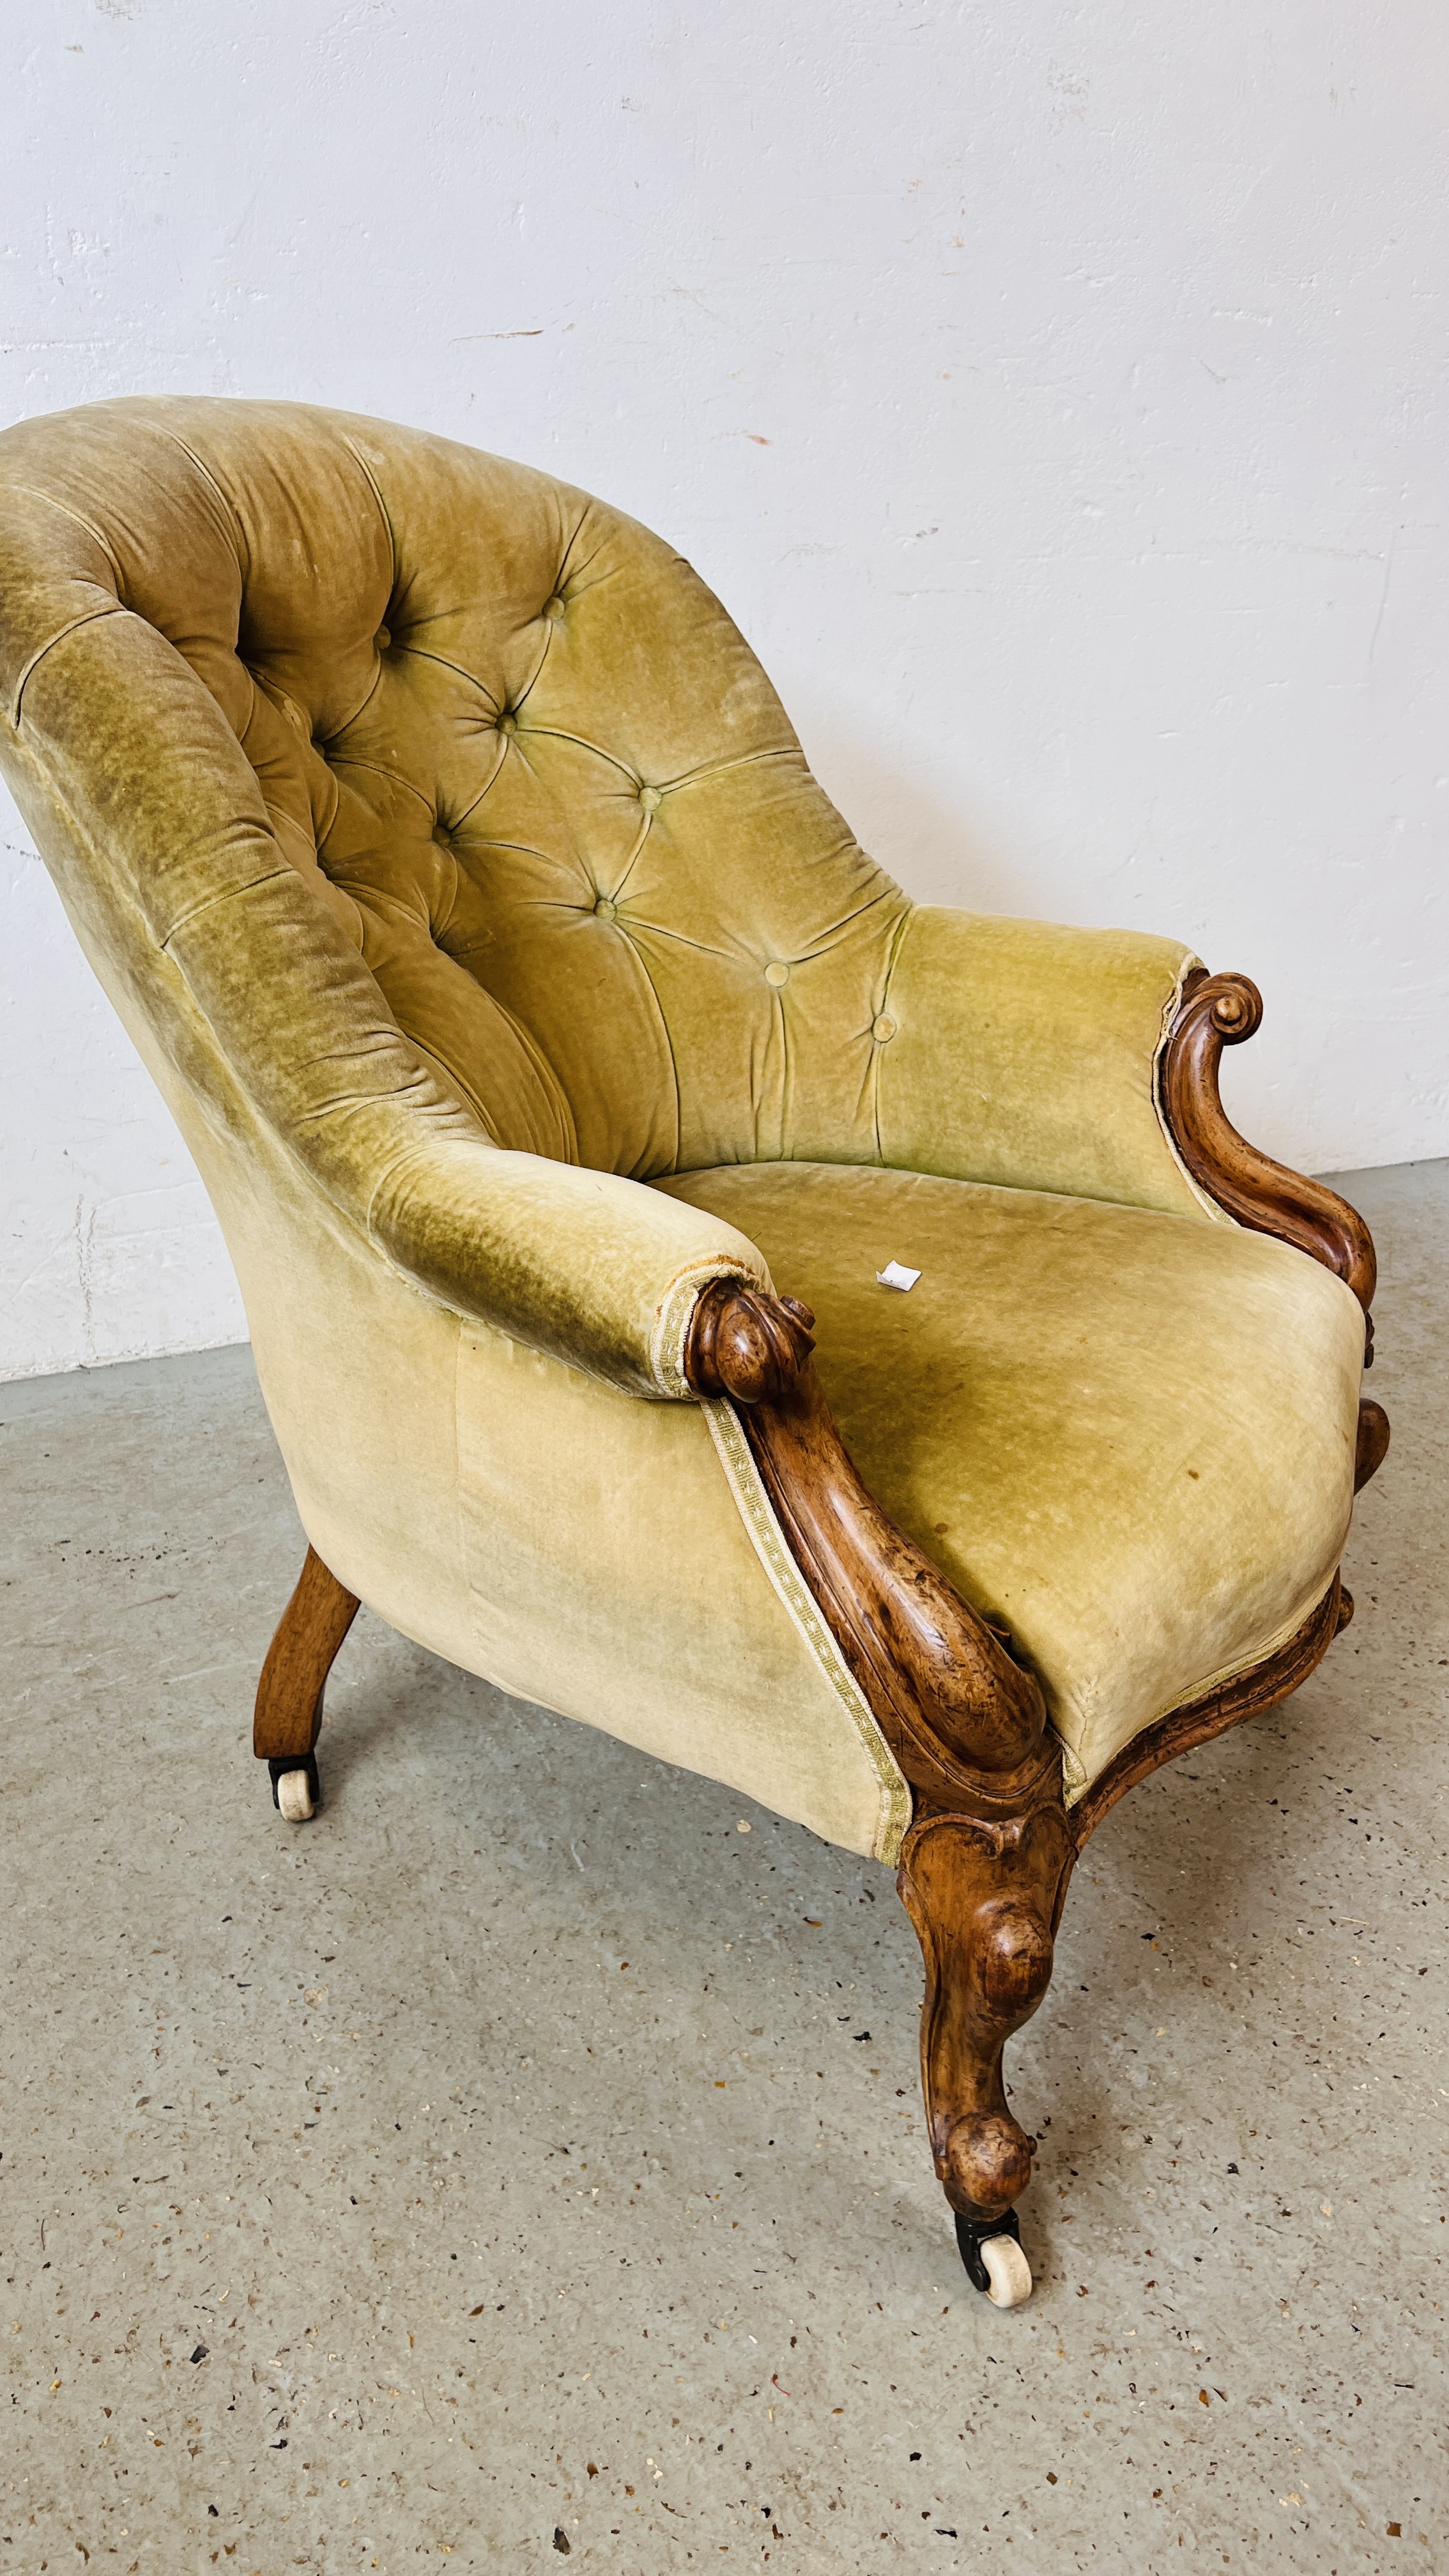 A VICTORIAN MAHOGANY FRAMED BUTTON BACK NURSING CHAIR ON CERAMIC CASTERS. - Image 9 of 9